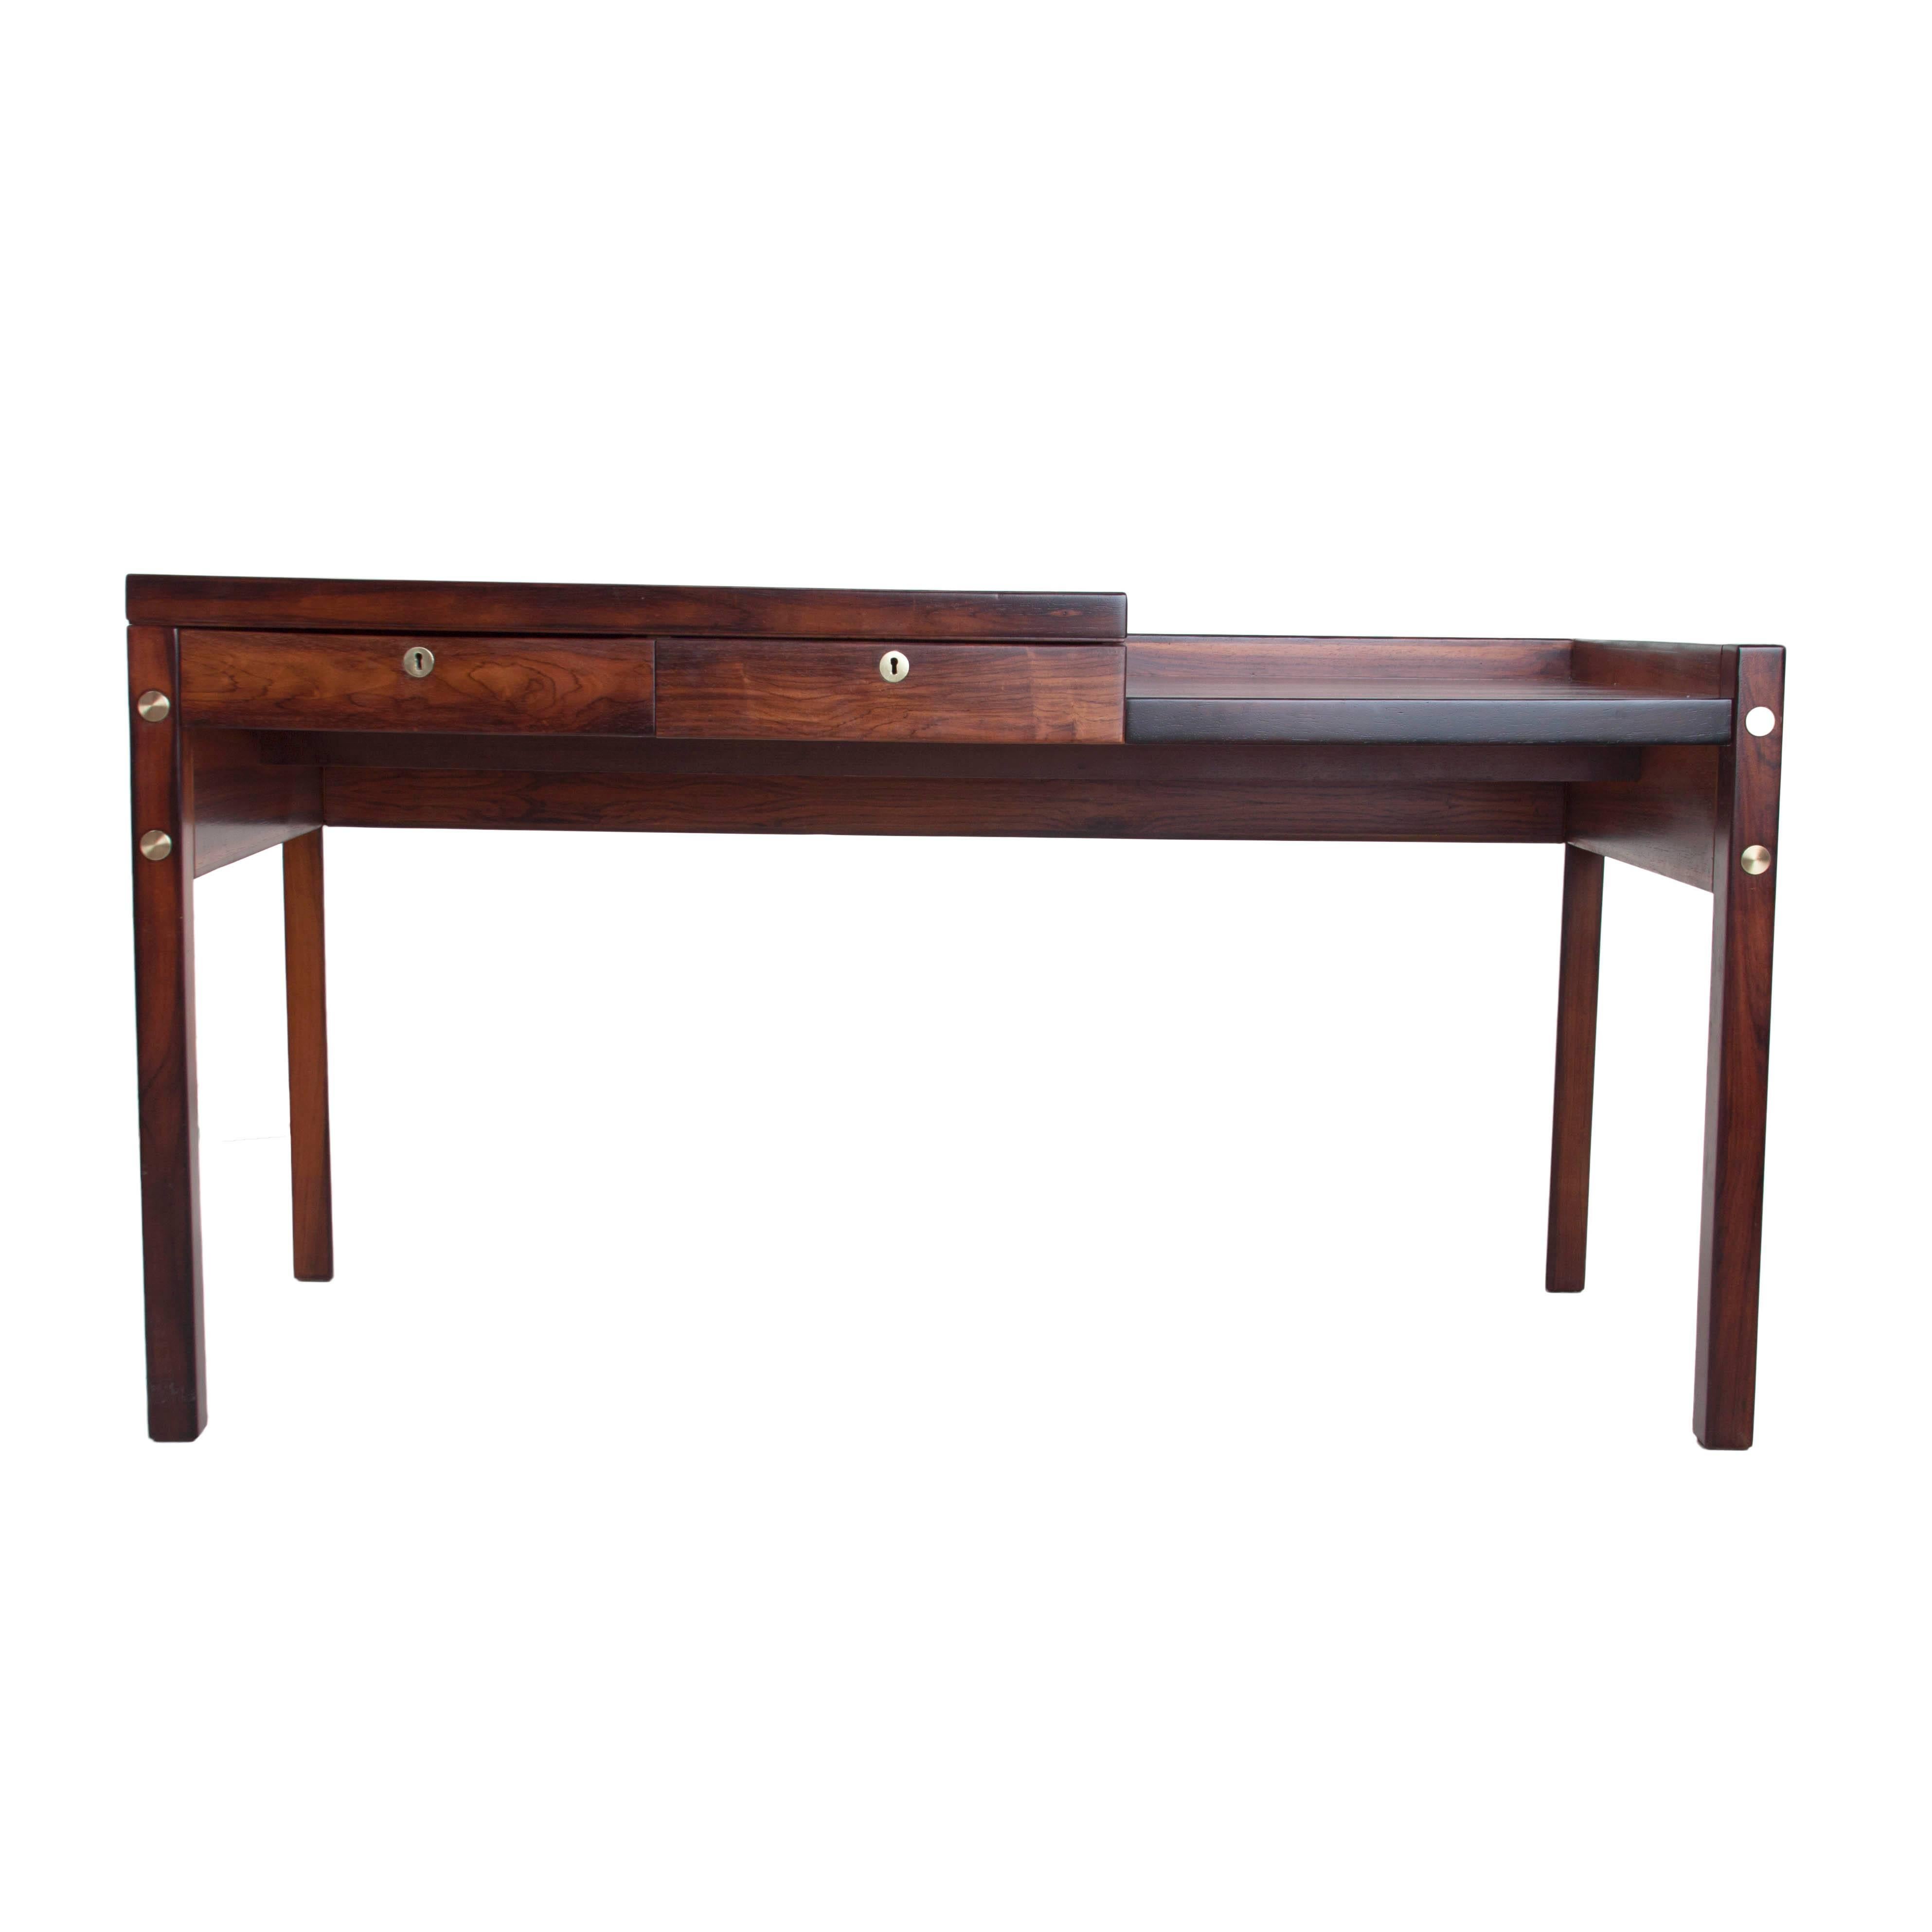 Beautifully crafted Sergio Rodrigues multi-level desk in rosewood with brass details.